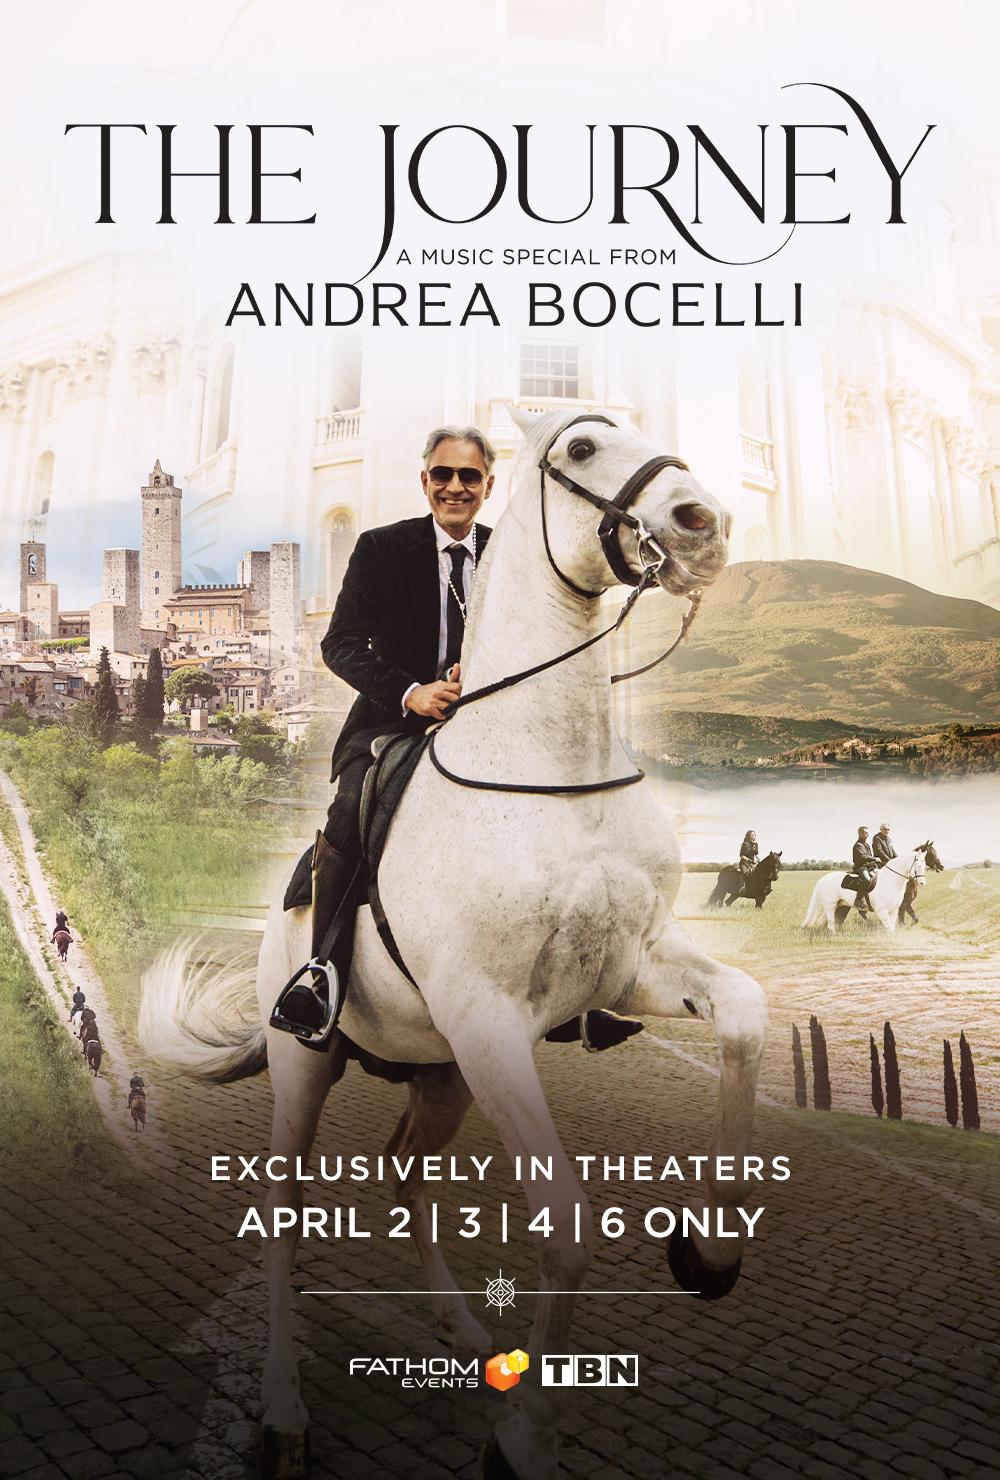 The Journey: A Music Special from Andrea Bocelli